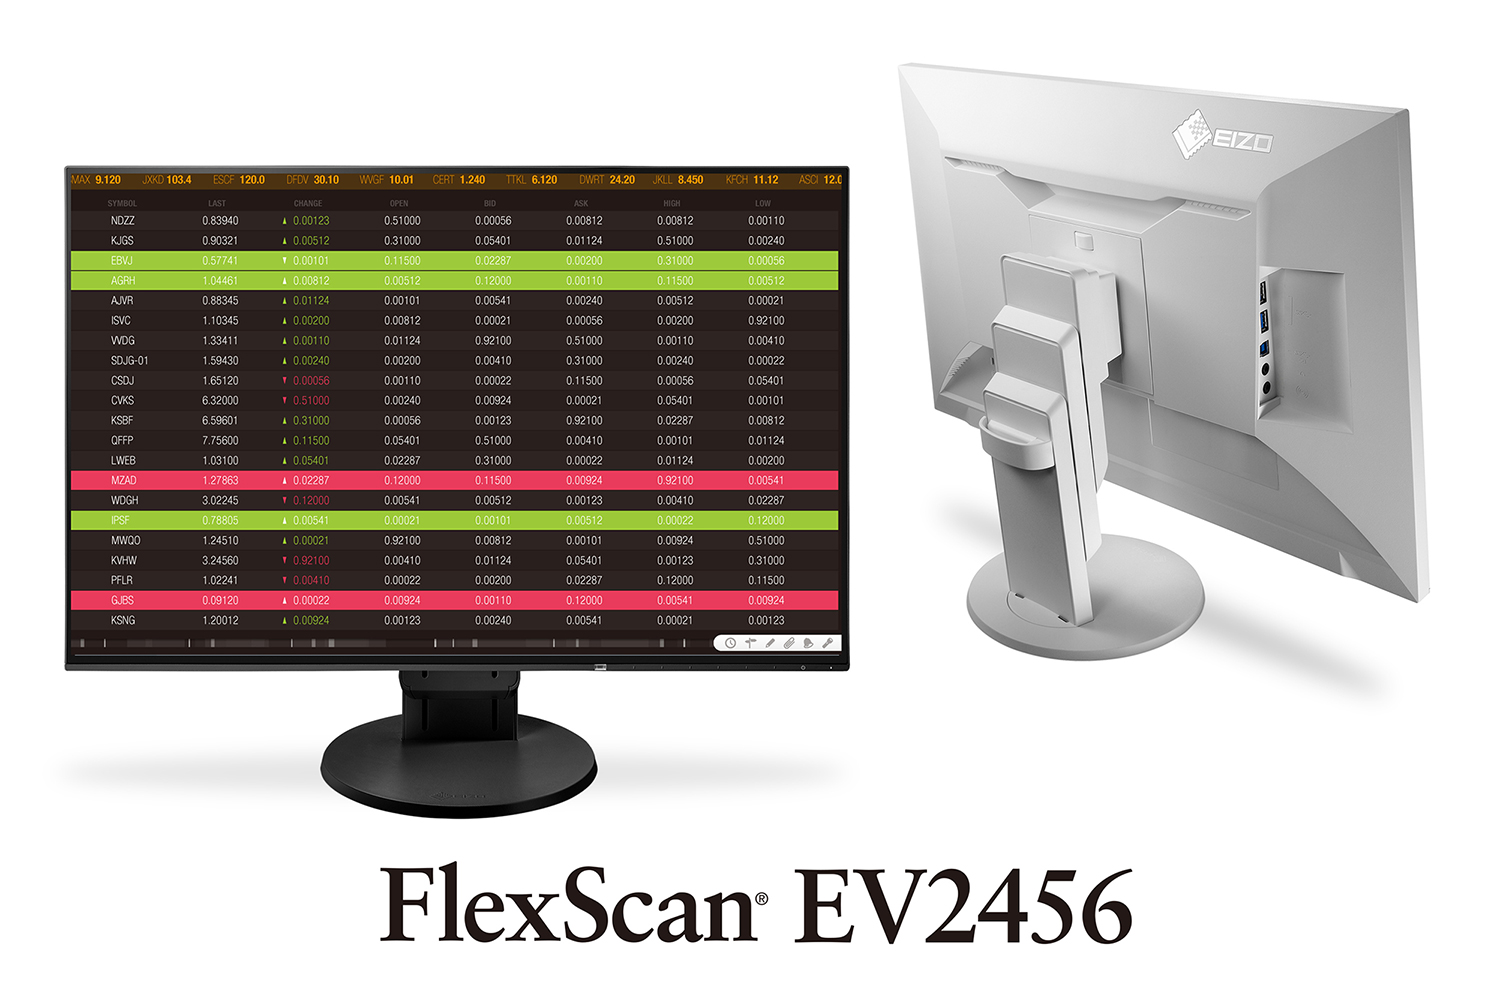 EIZO FlexScan EV2451 & EV2456 Launched: Thin Bezels in 16:9 and 16:10